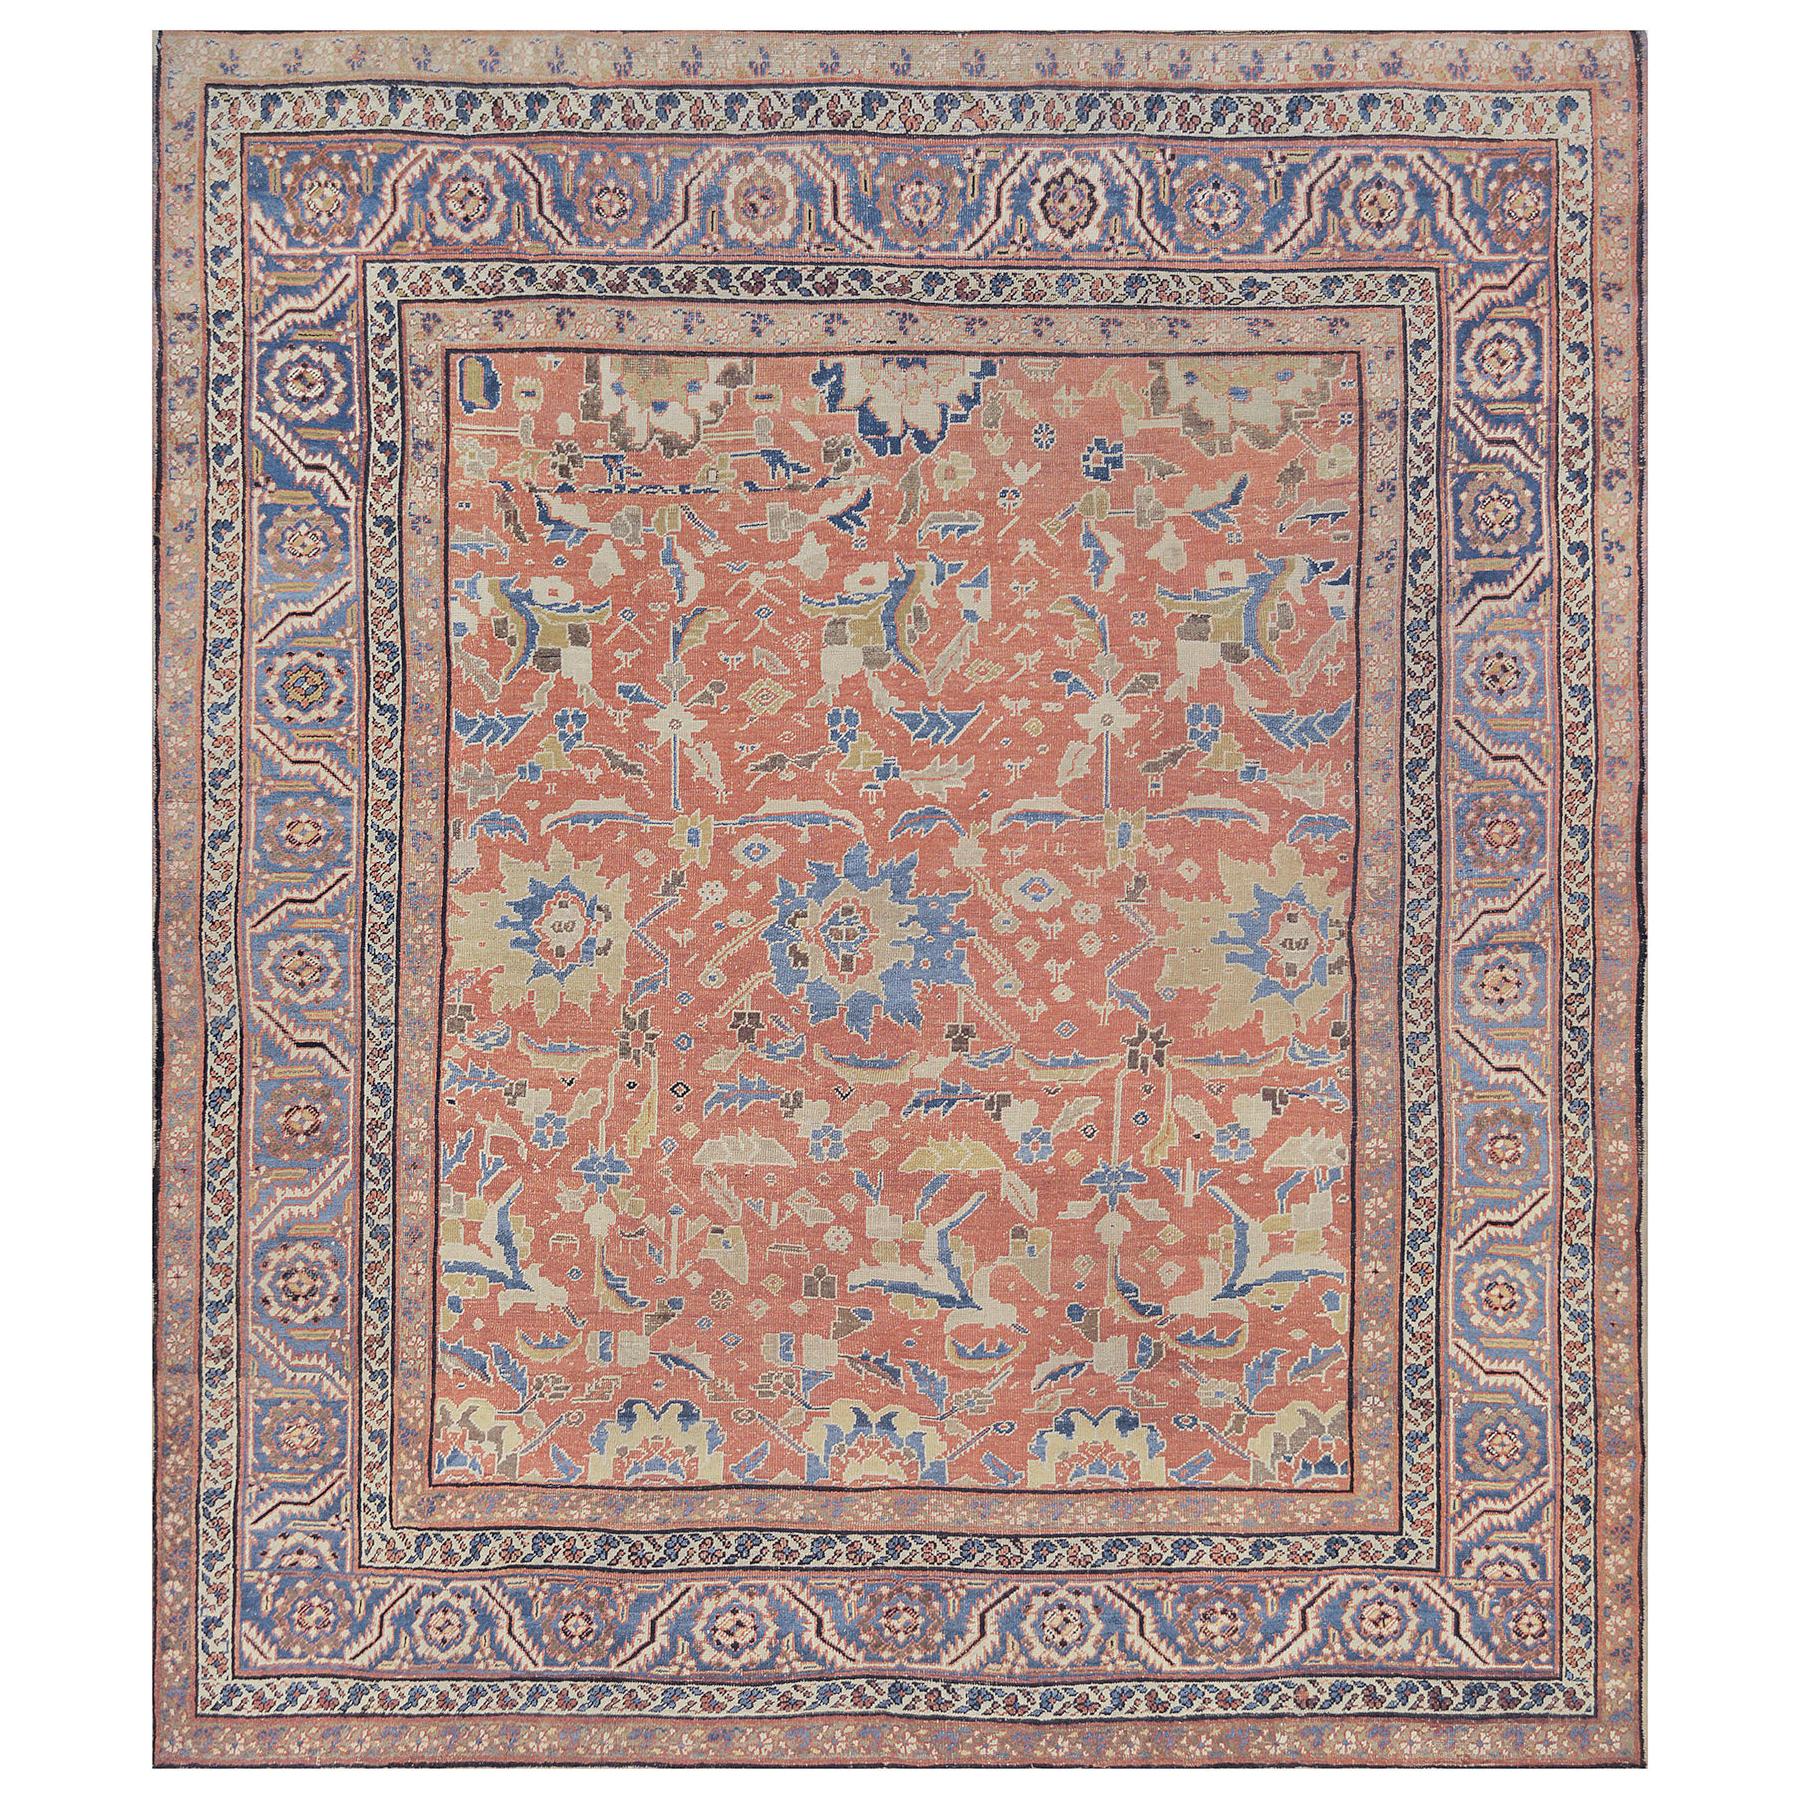 Late 19th Century Bakhshaish Rug from North West Persia